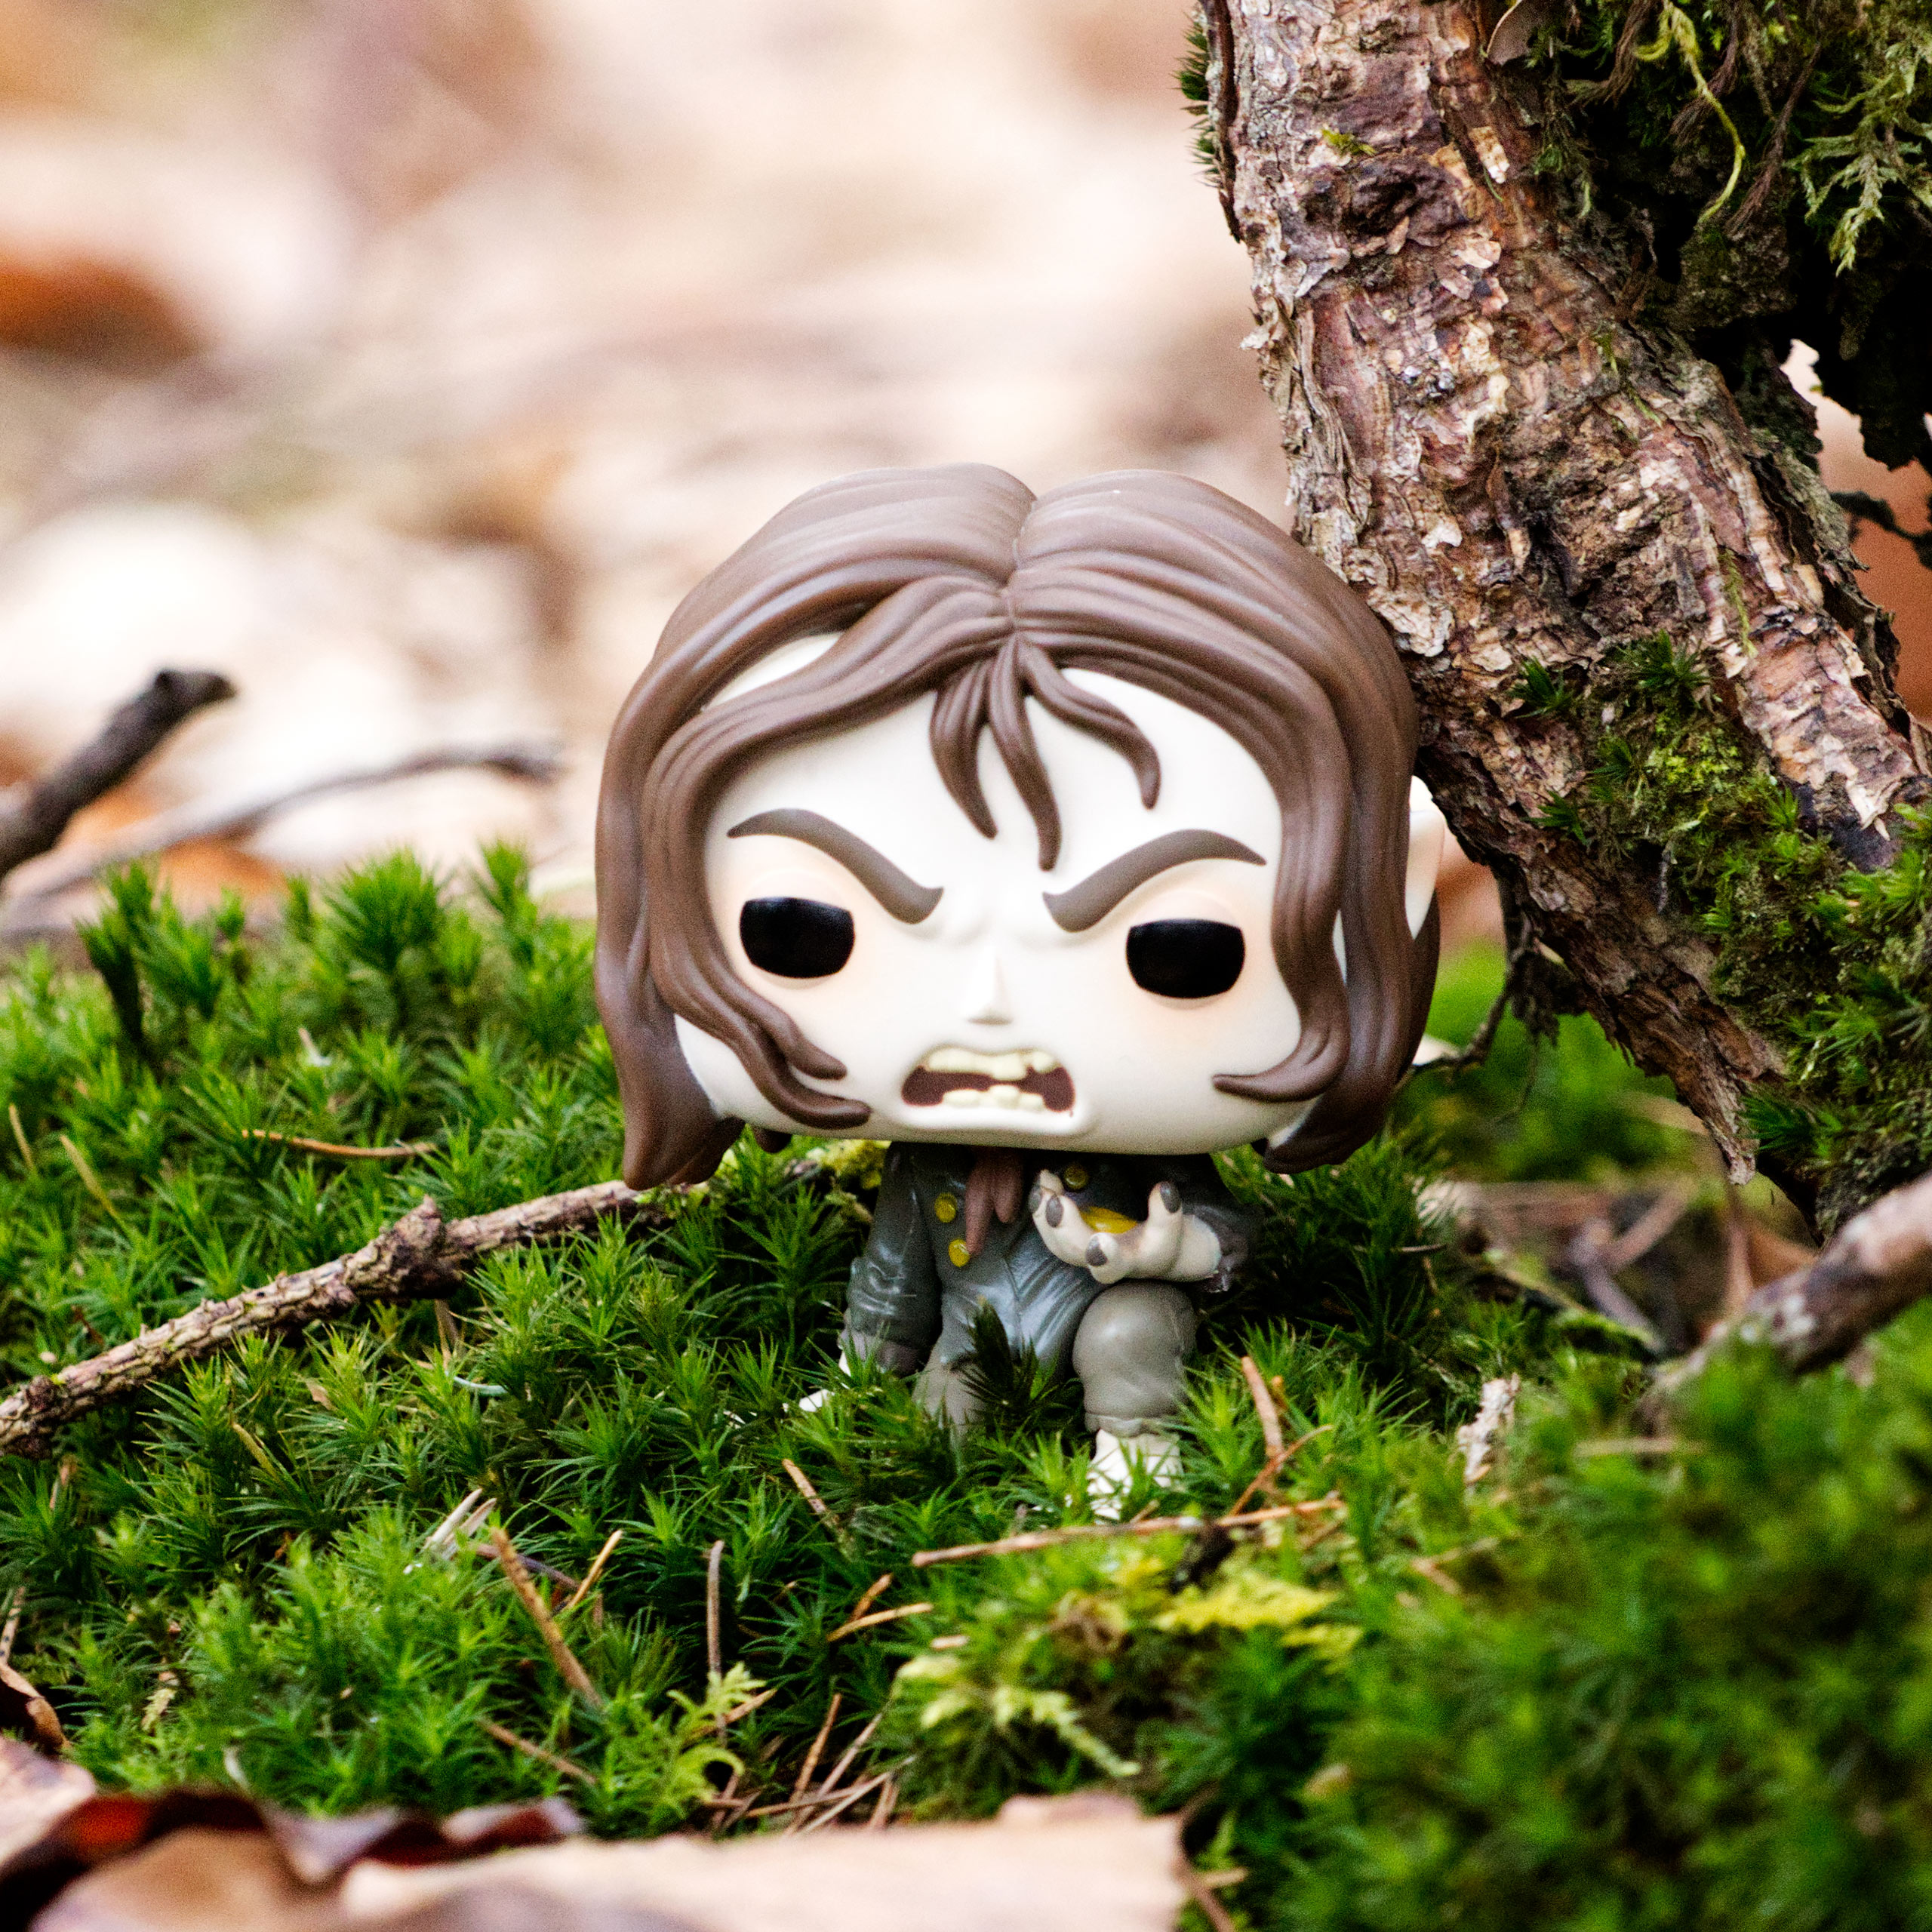 Lord of the Rings - Smeagol Funko Pop Figure